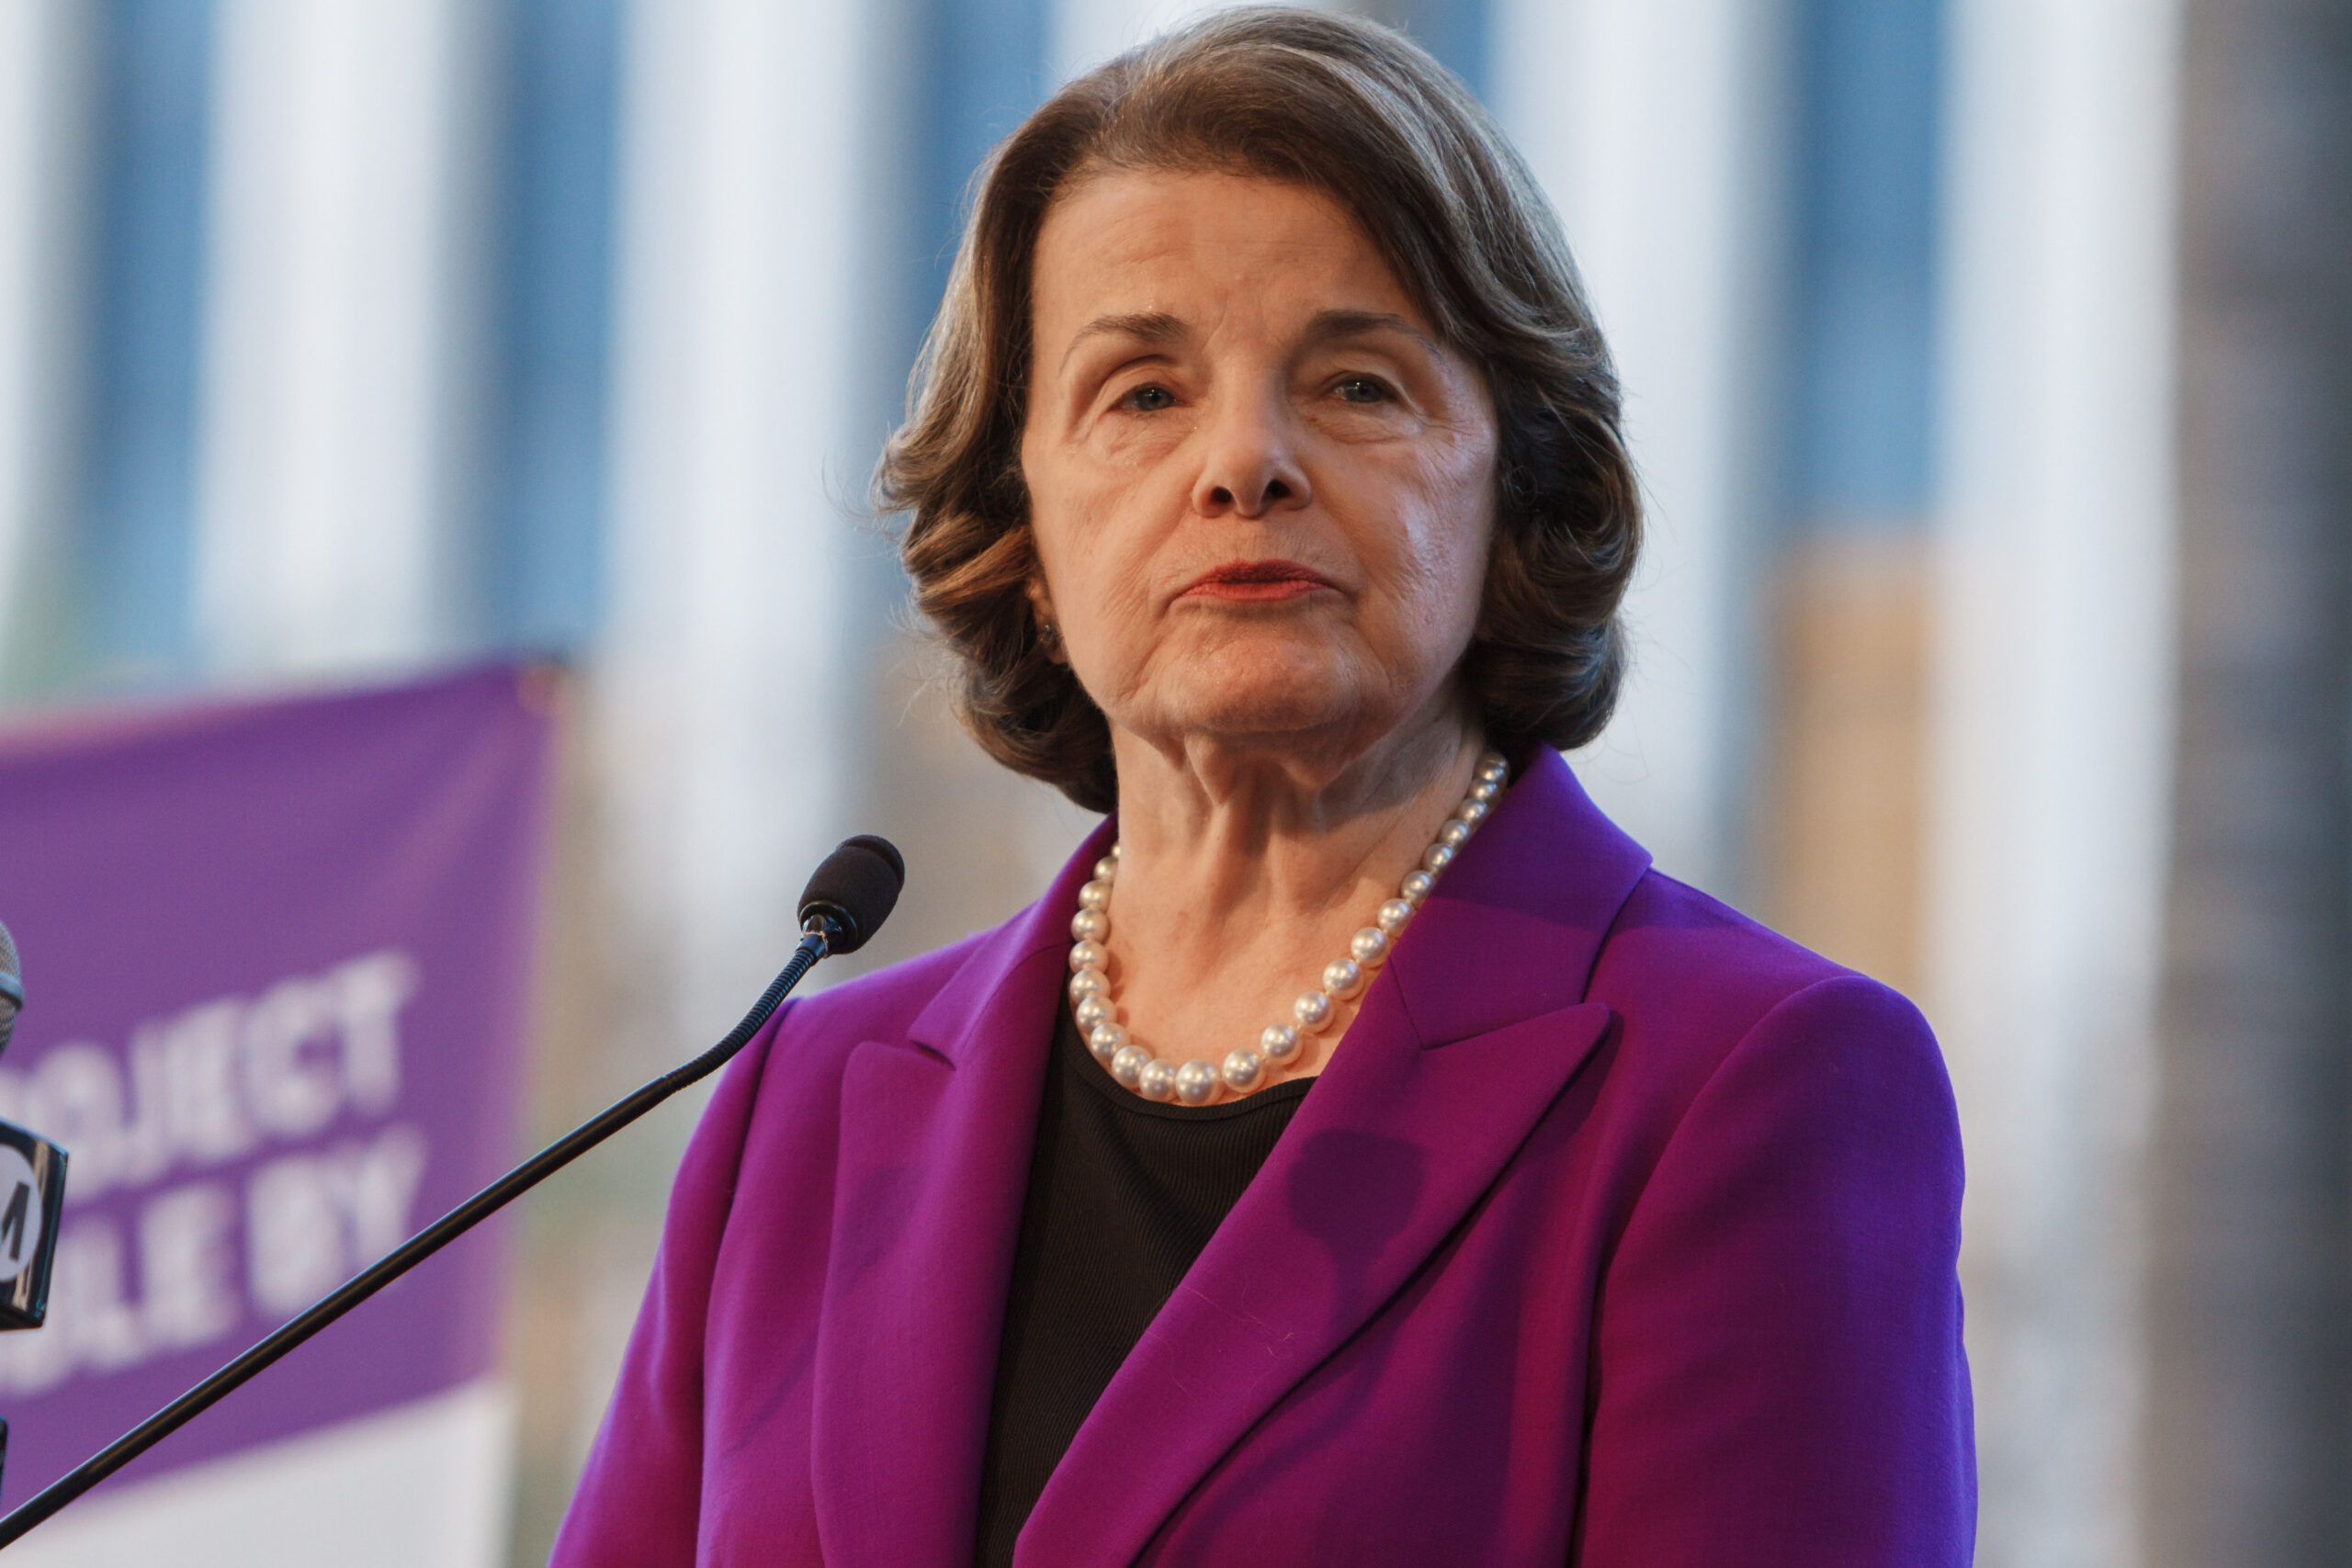 KPFA Special – The Legacy of Dianne Feinstein